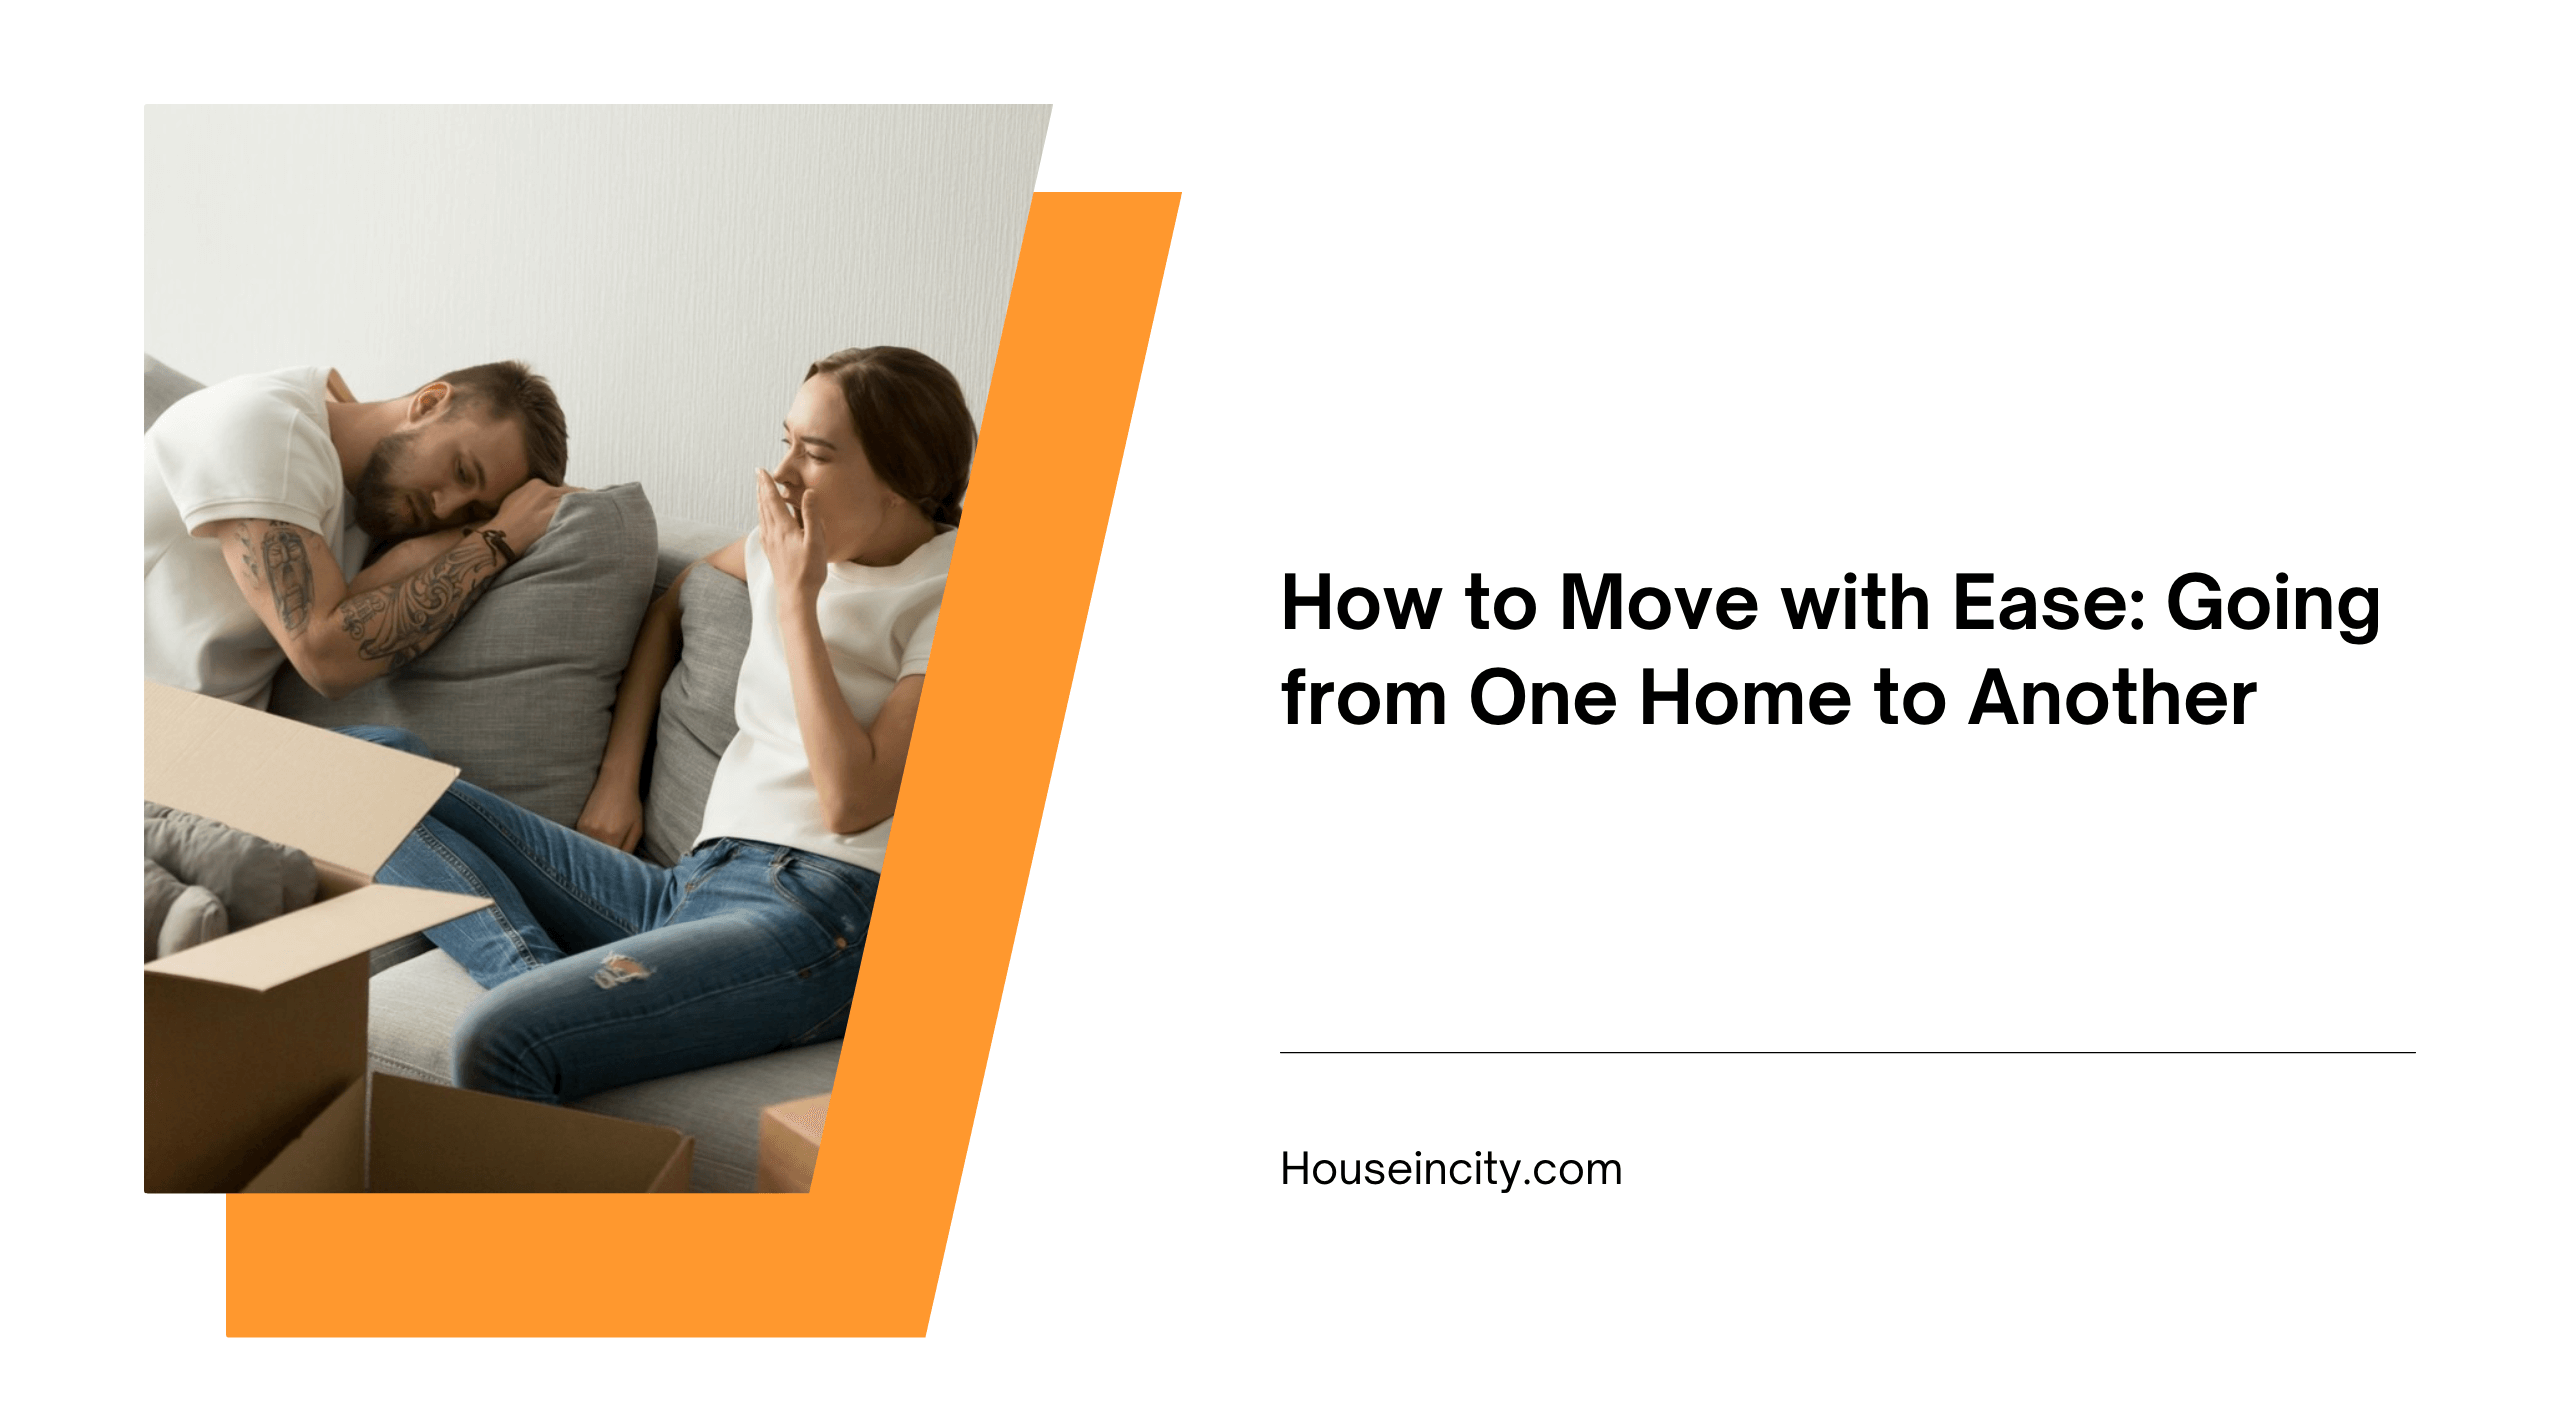 How to Move with Ease: Going from One Home to Another